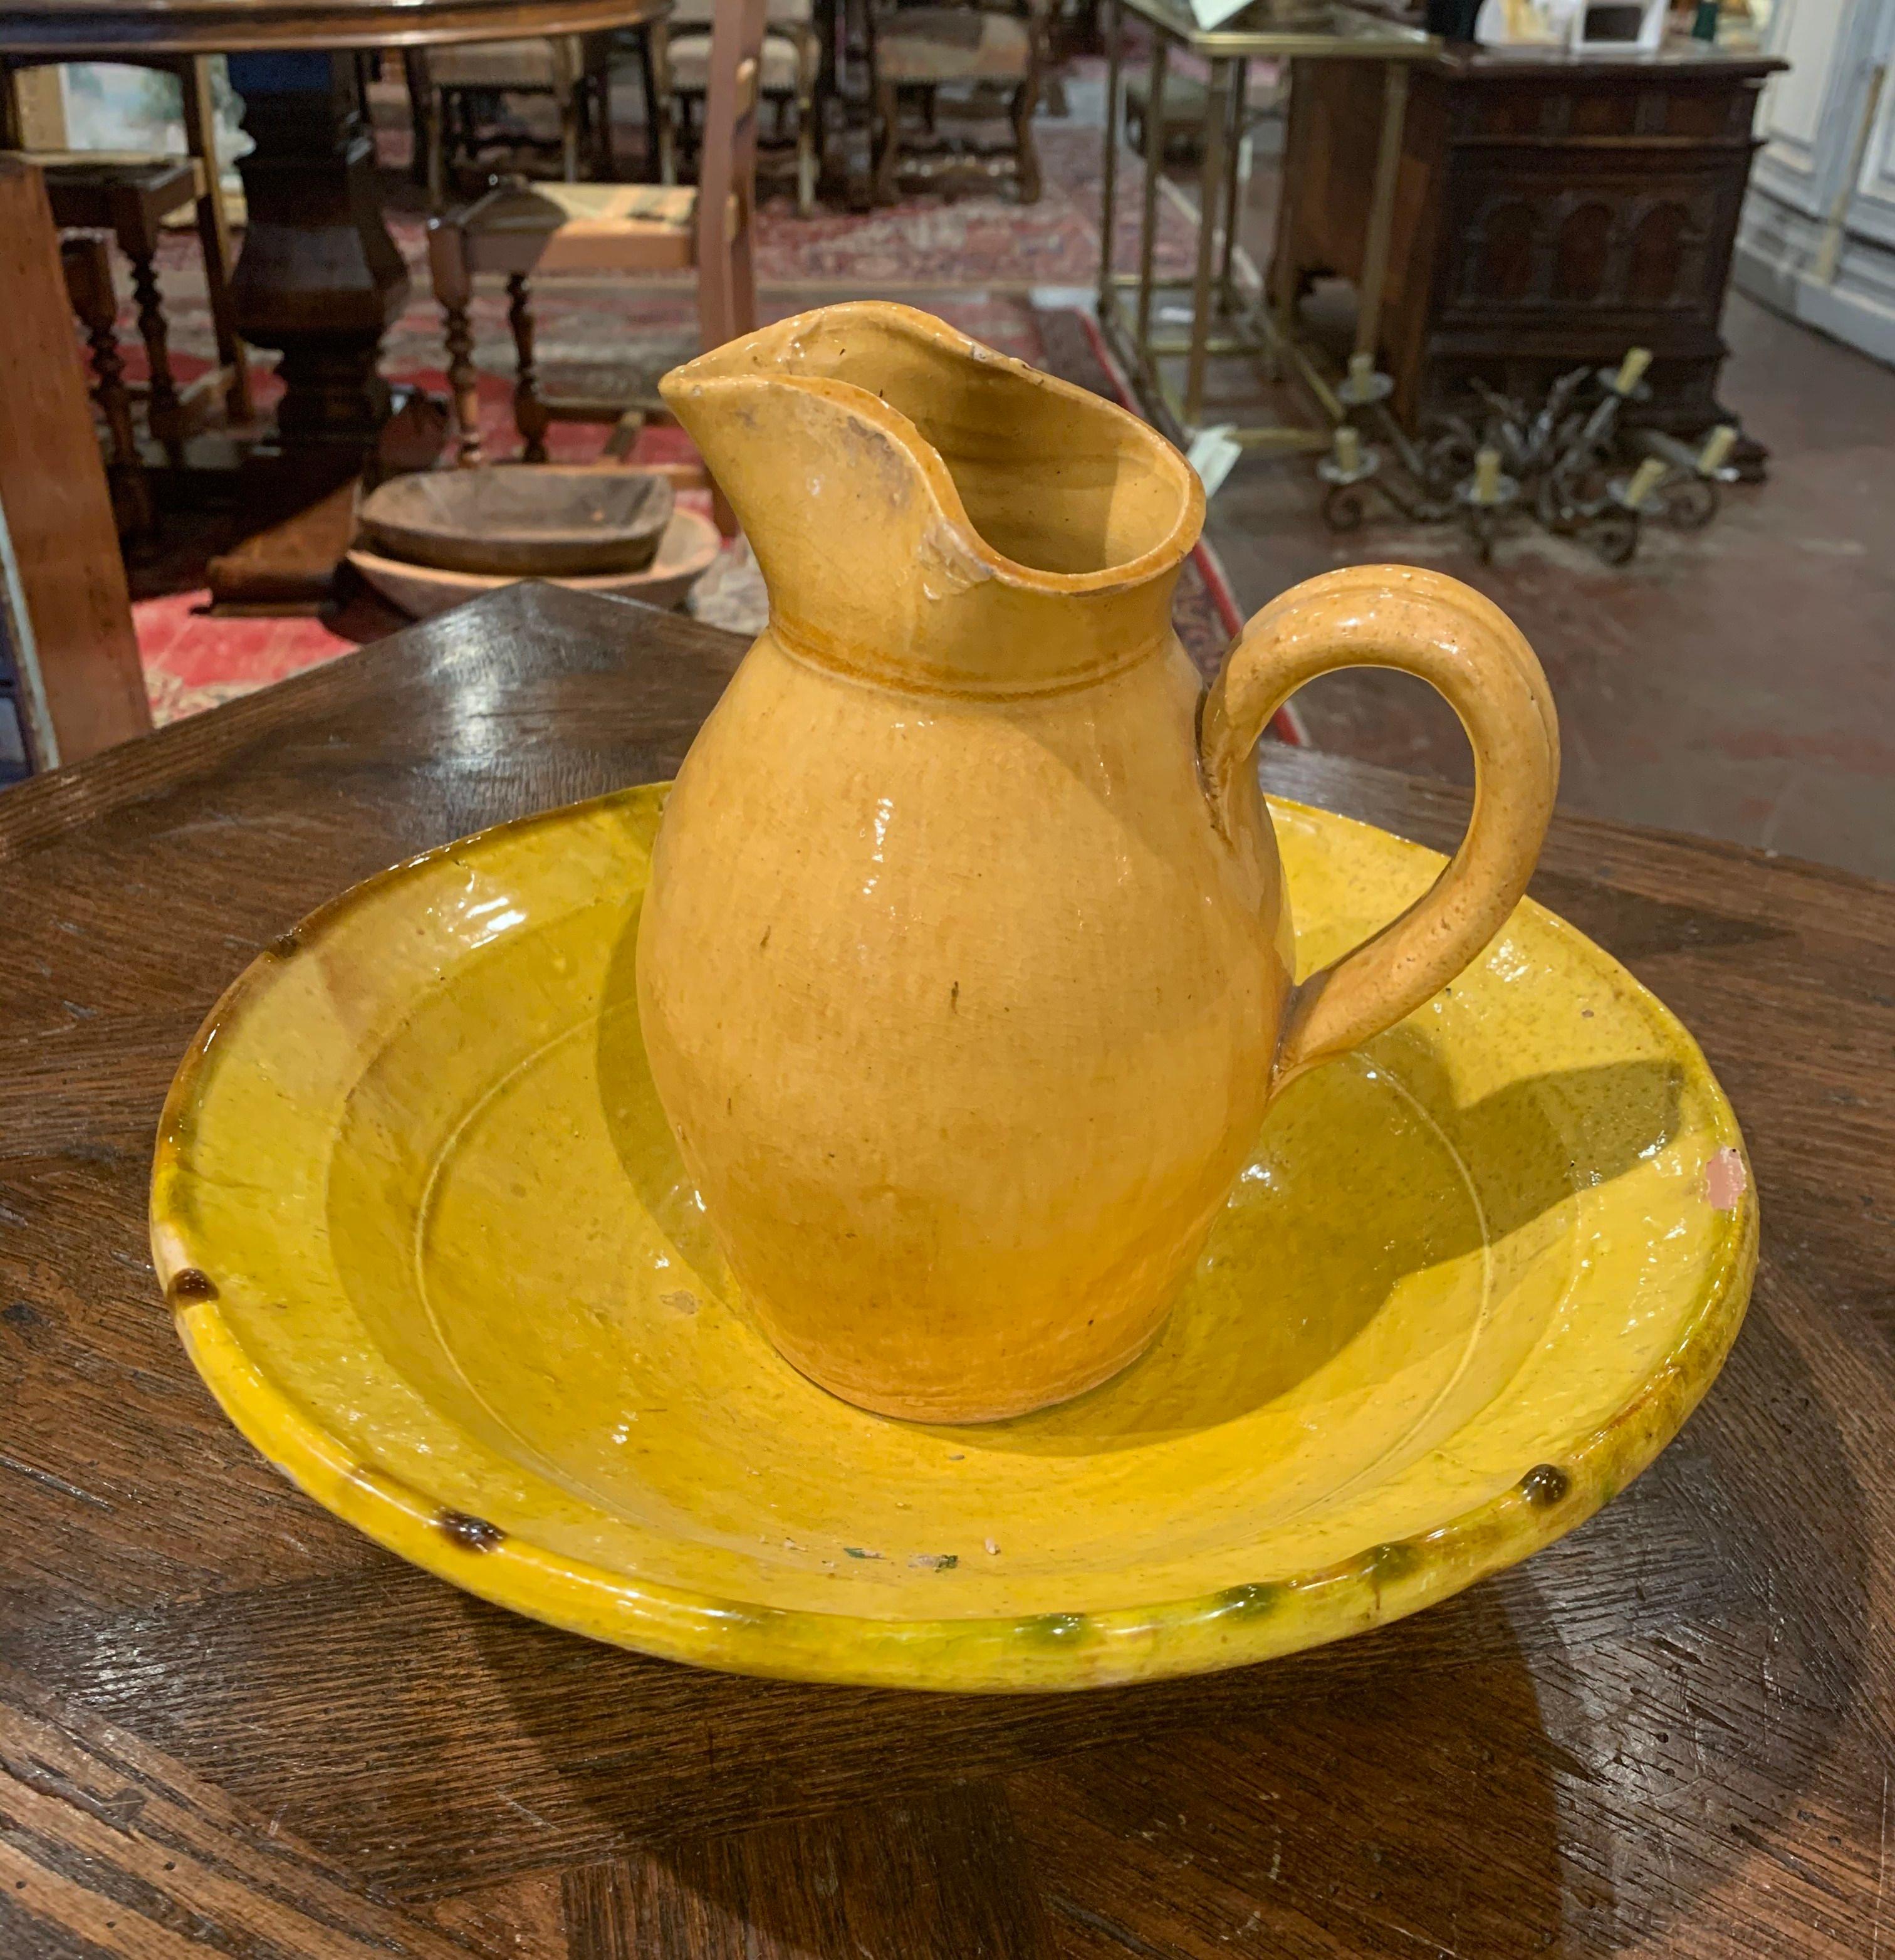 This antique water pitcher with matching bowl were crafted in Provence, circa 1930; typically used to freshen up in the morning, the decorative pottery set have a glazed covering in the mustard palette. Both earthenware pieces are in excellent